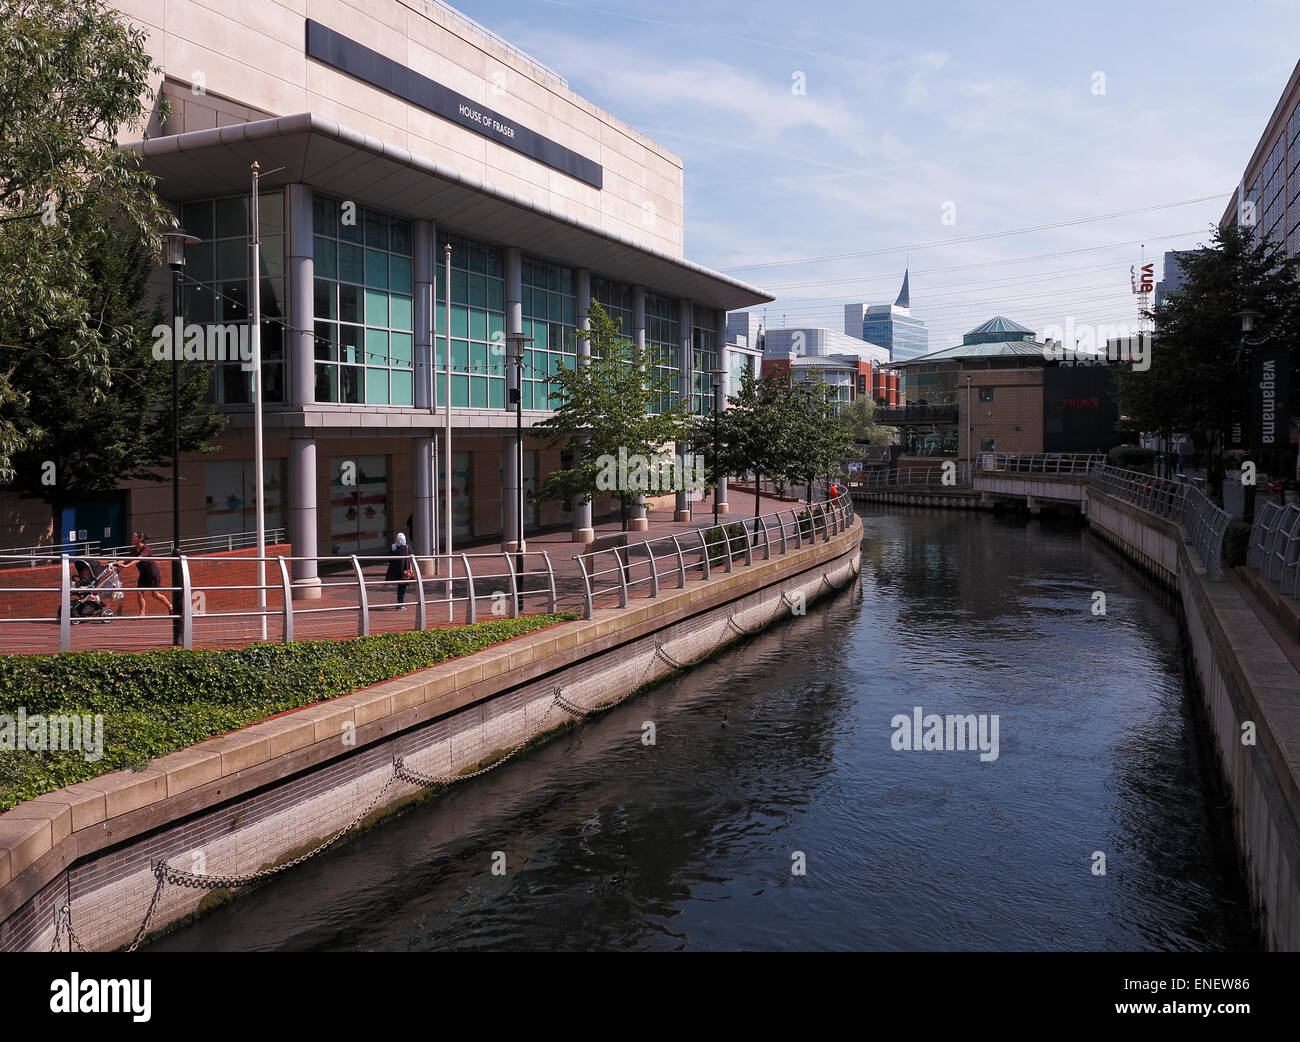 The Oracle Shopping Centre on the River Kennet Reading Berkshire England UK Stock Photo